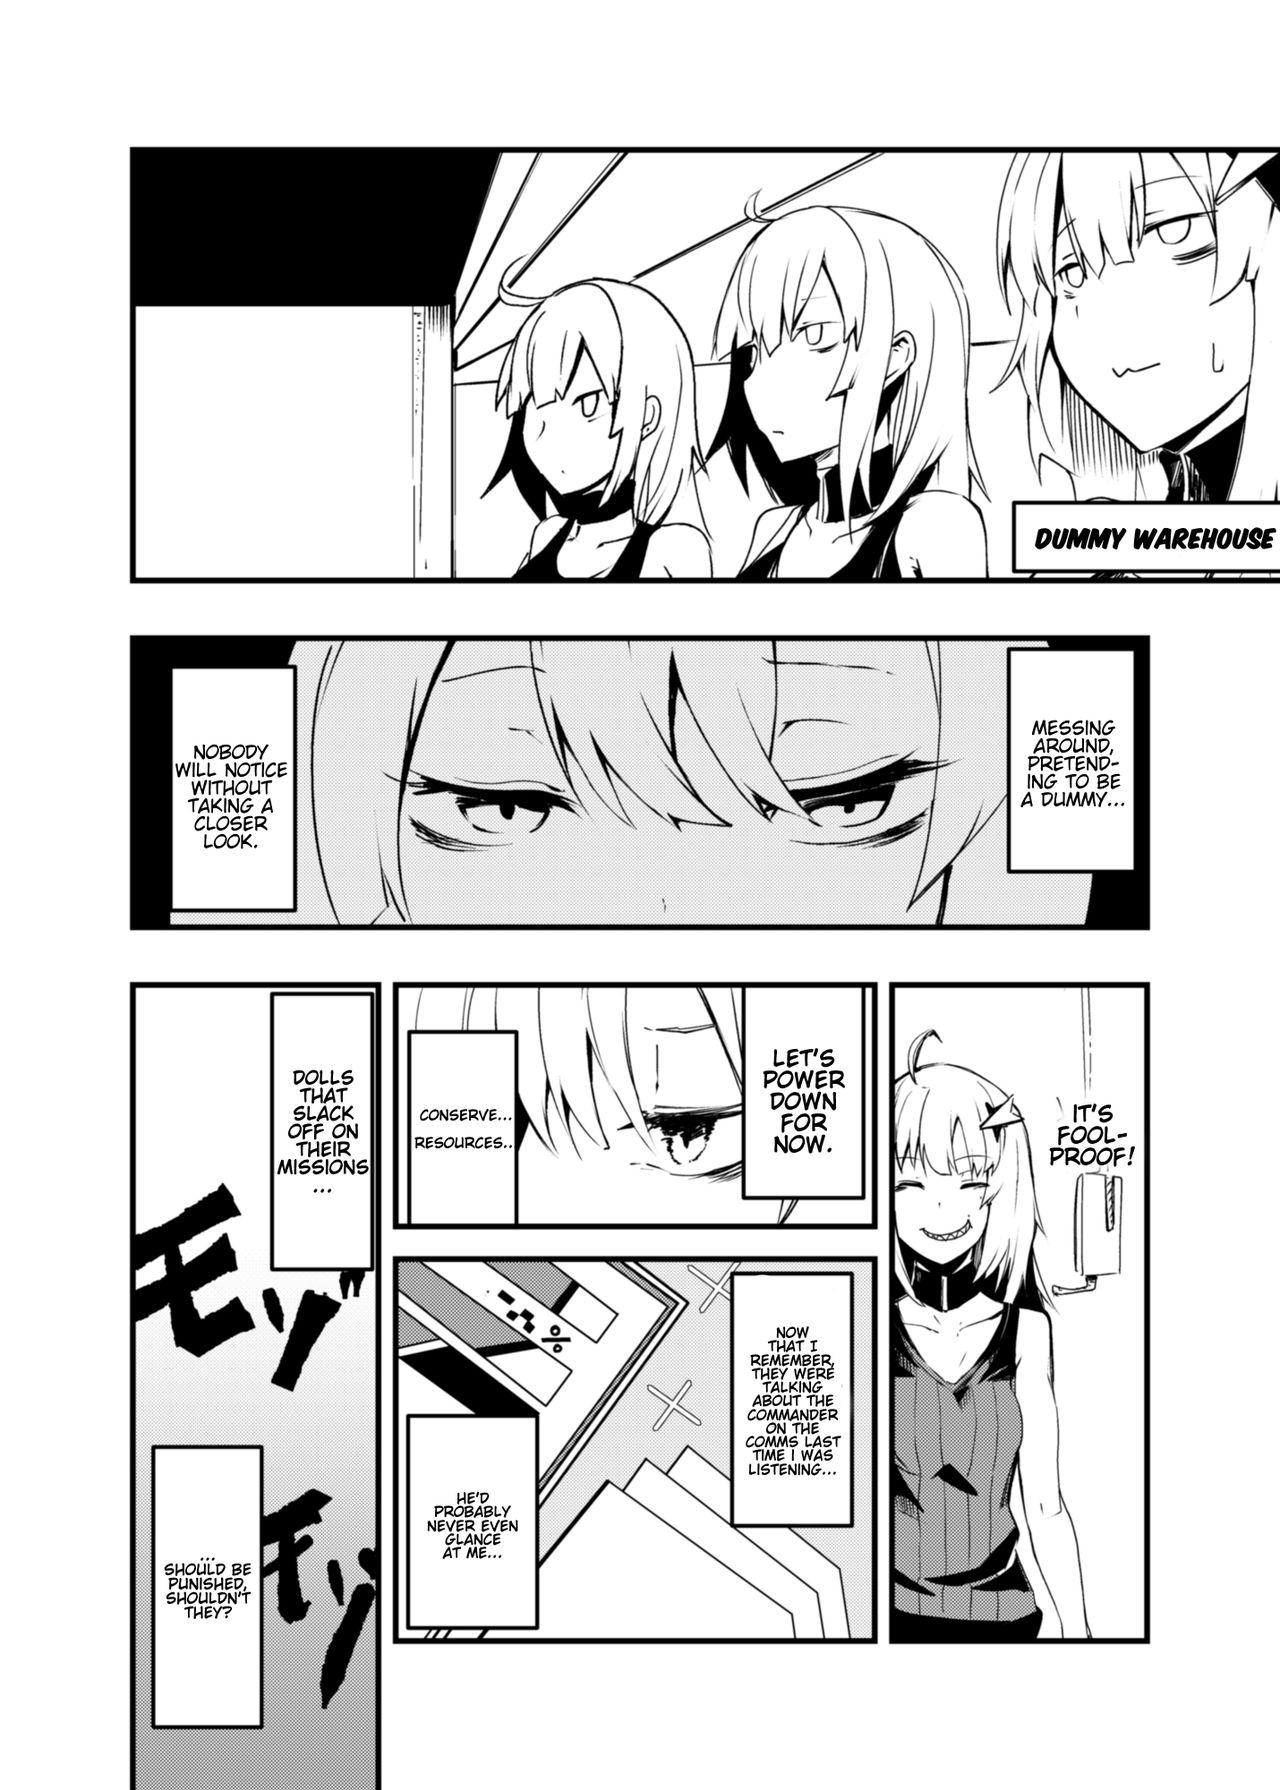 Dildos Dummy de Saborou. | Wagging Dummy. - Girls frontline Hot Couple Sex - Page 3